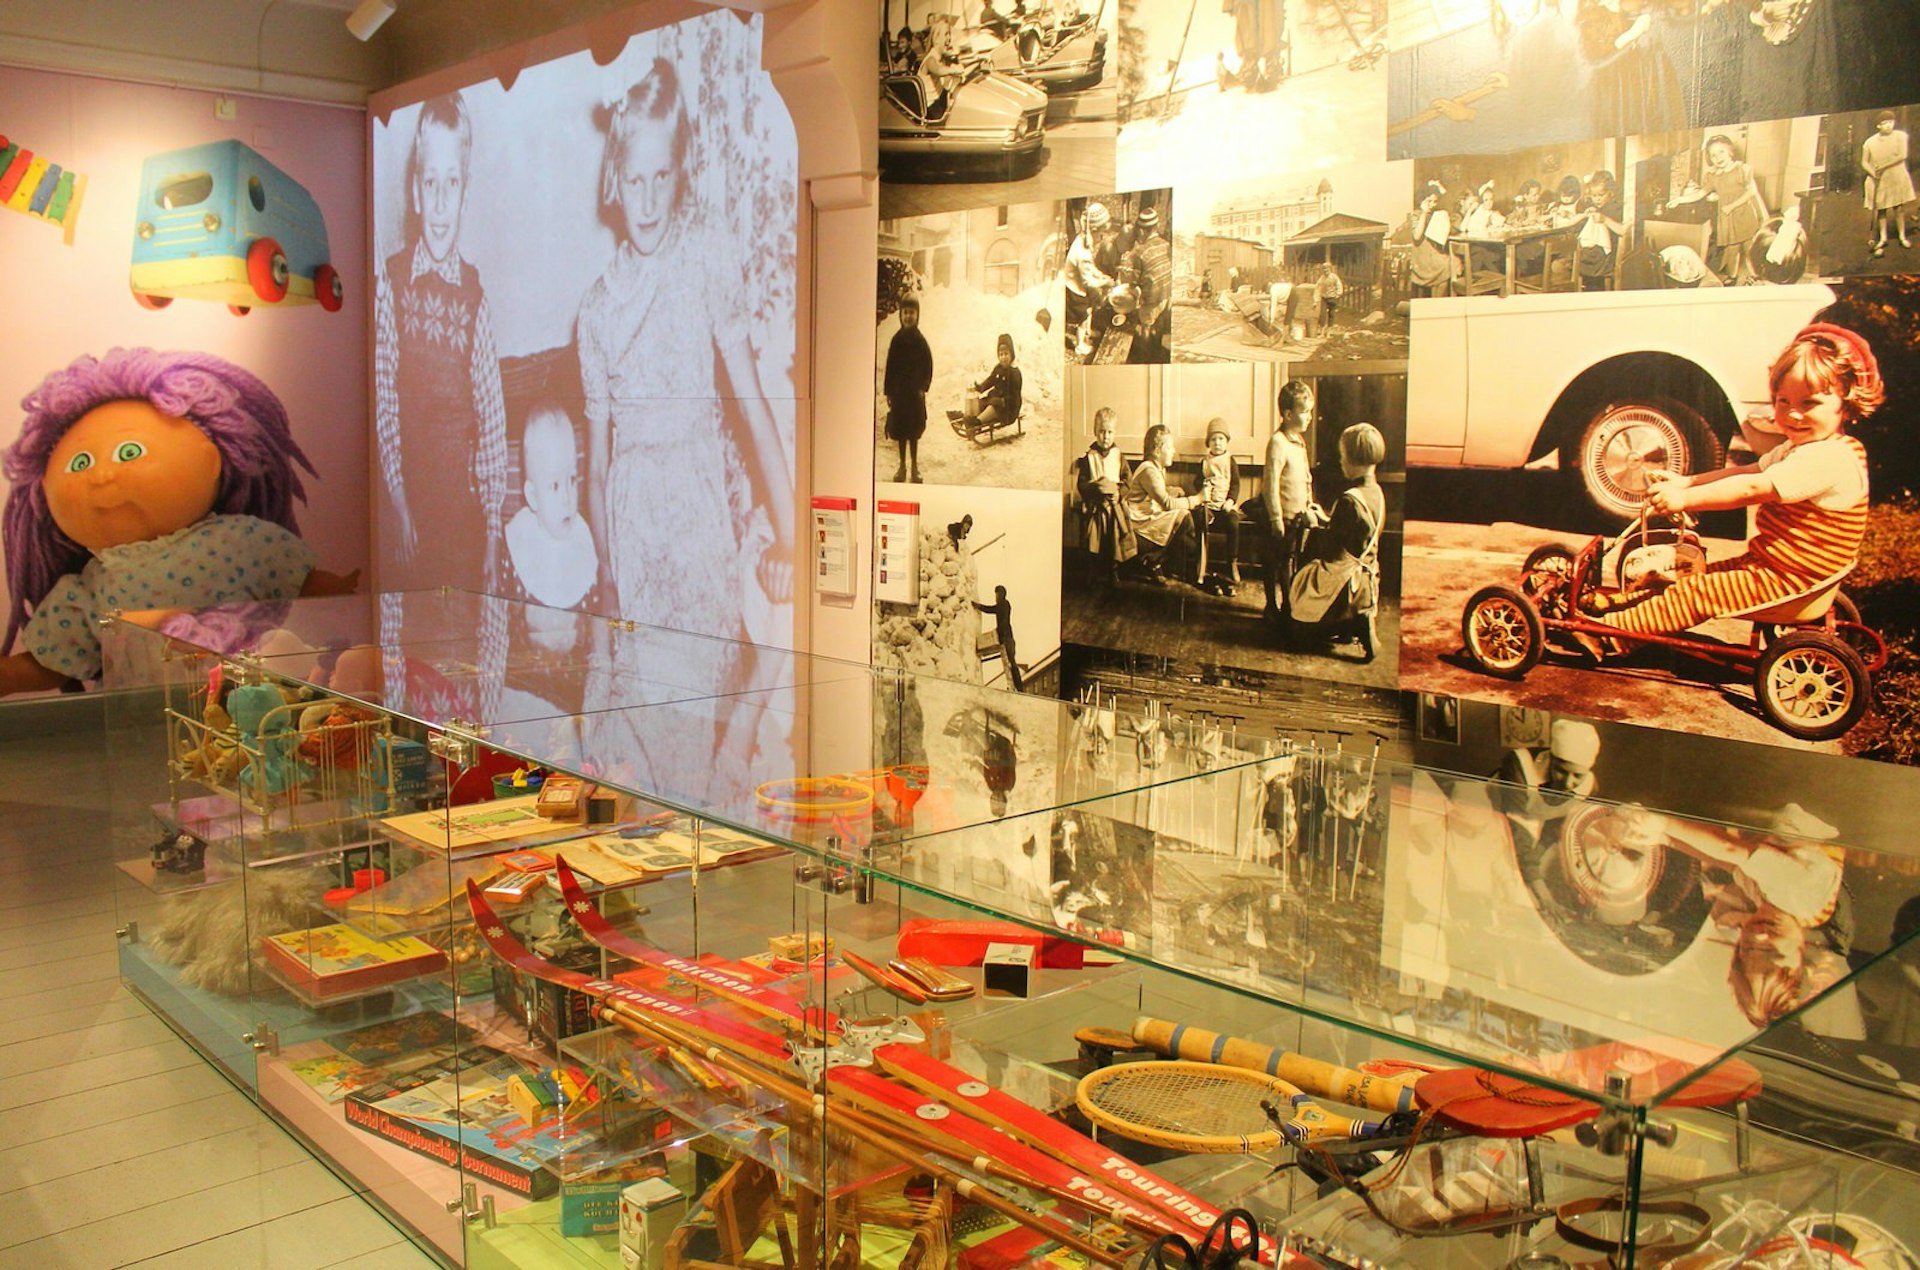 A display of toys and games at Children's Town, part of the City Museum, Helsinki